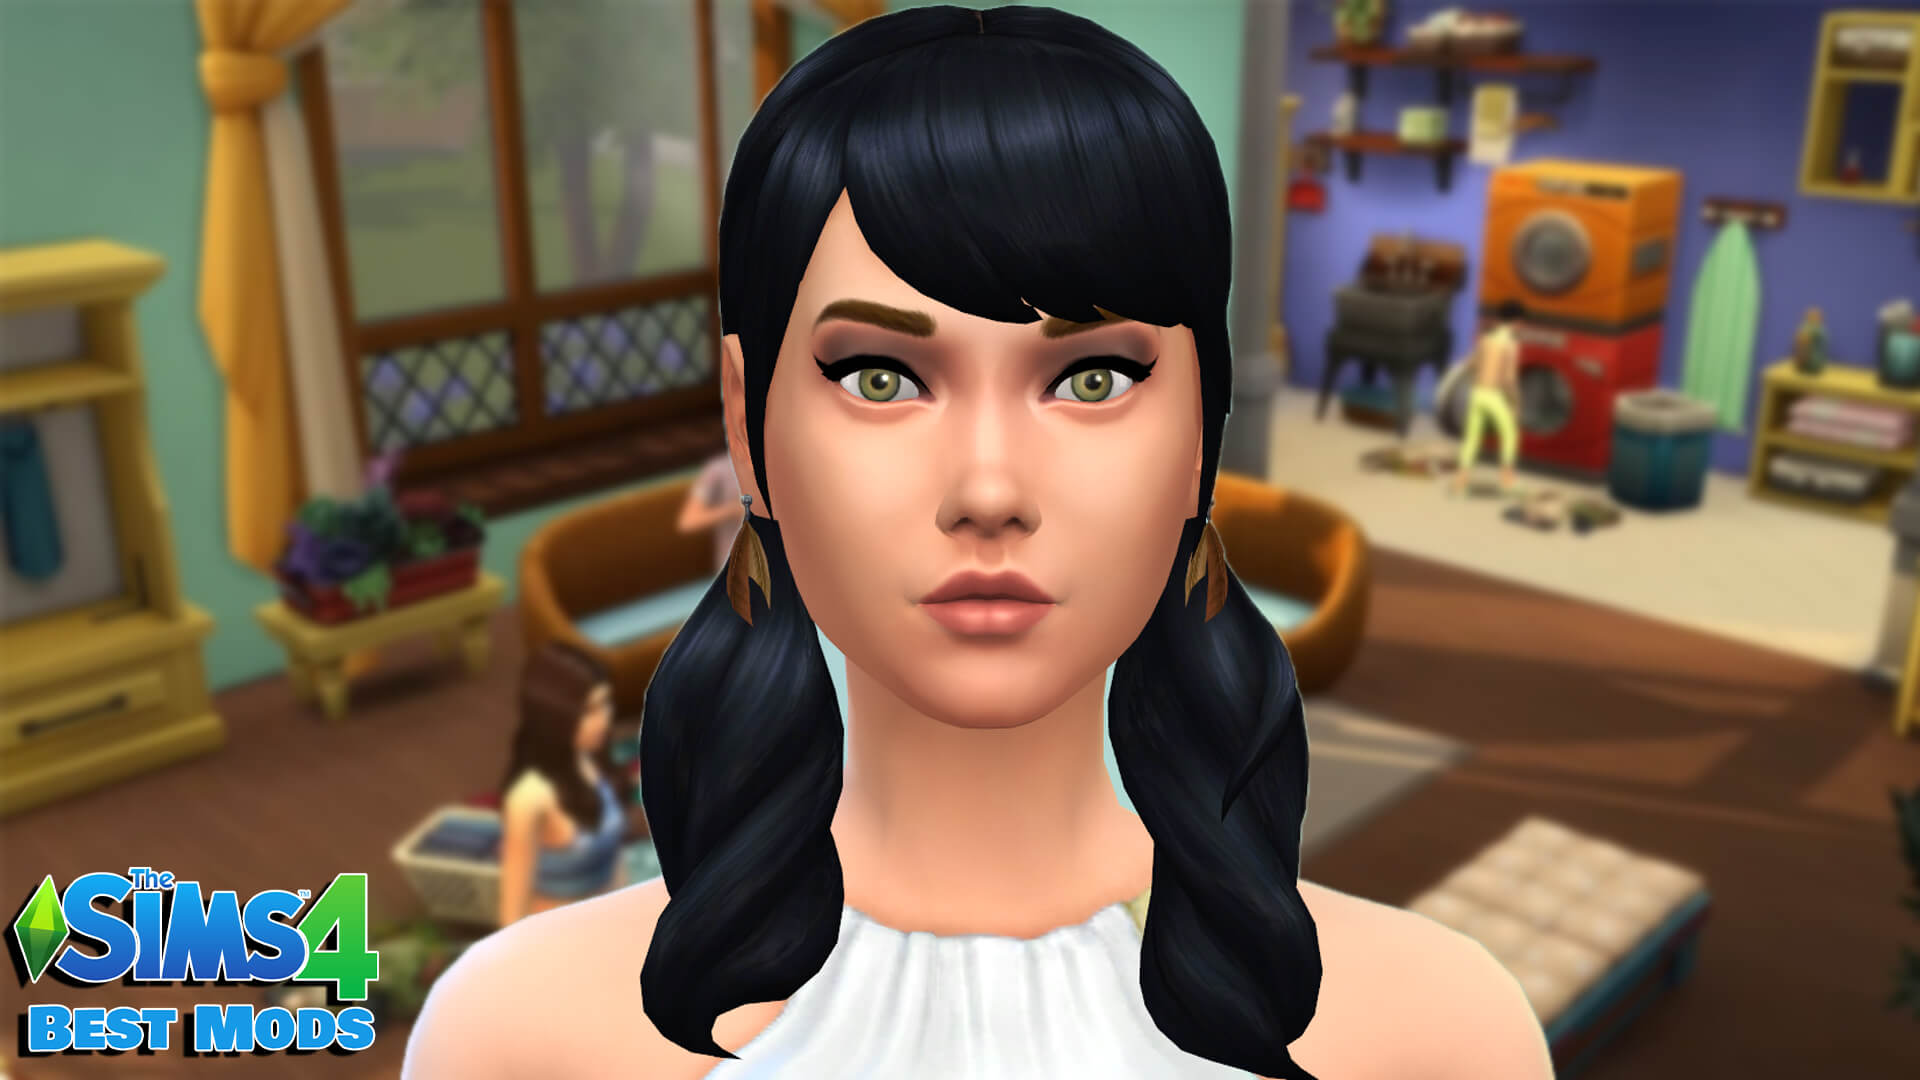 Sims 4 Household Jayda Best Sims Mods